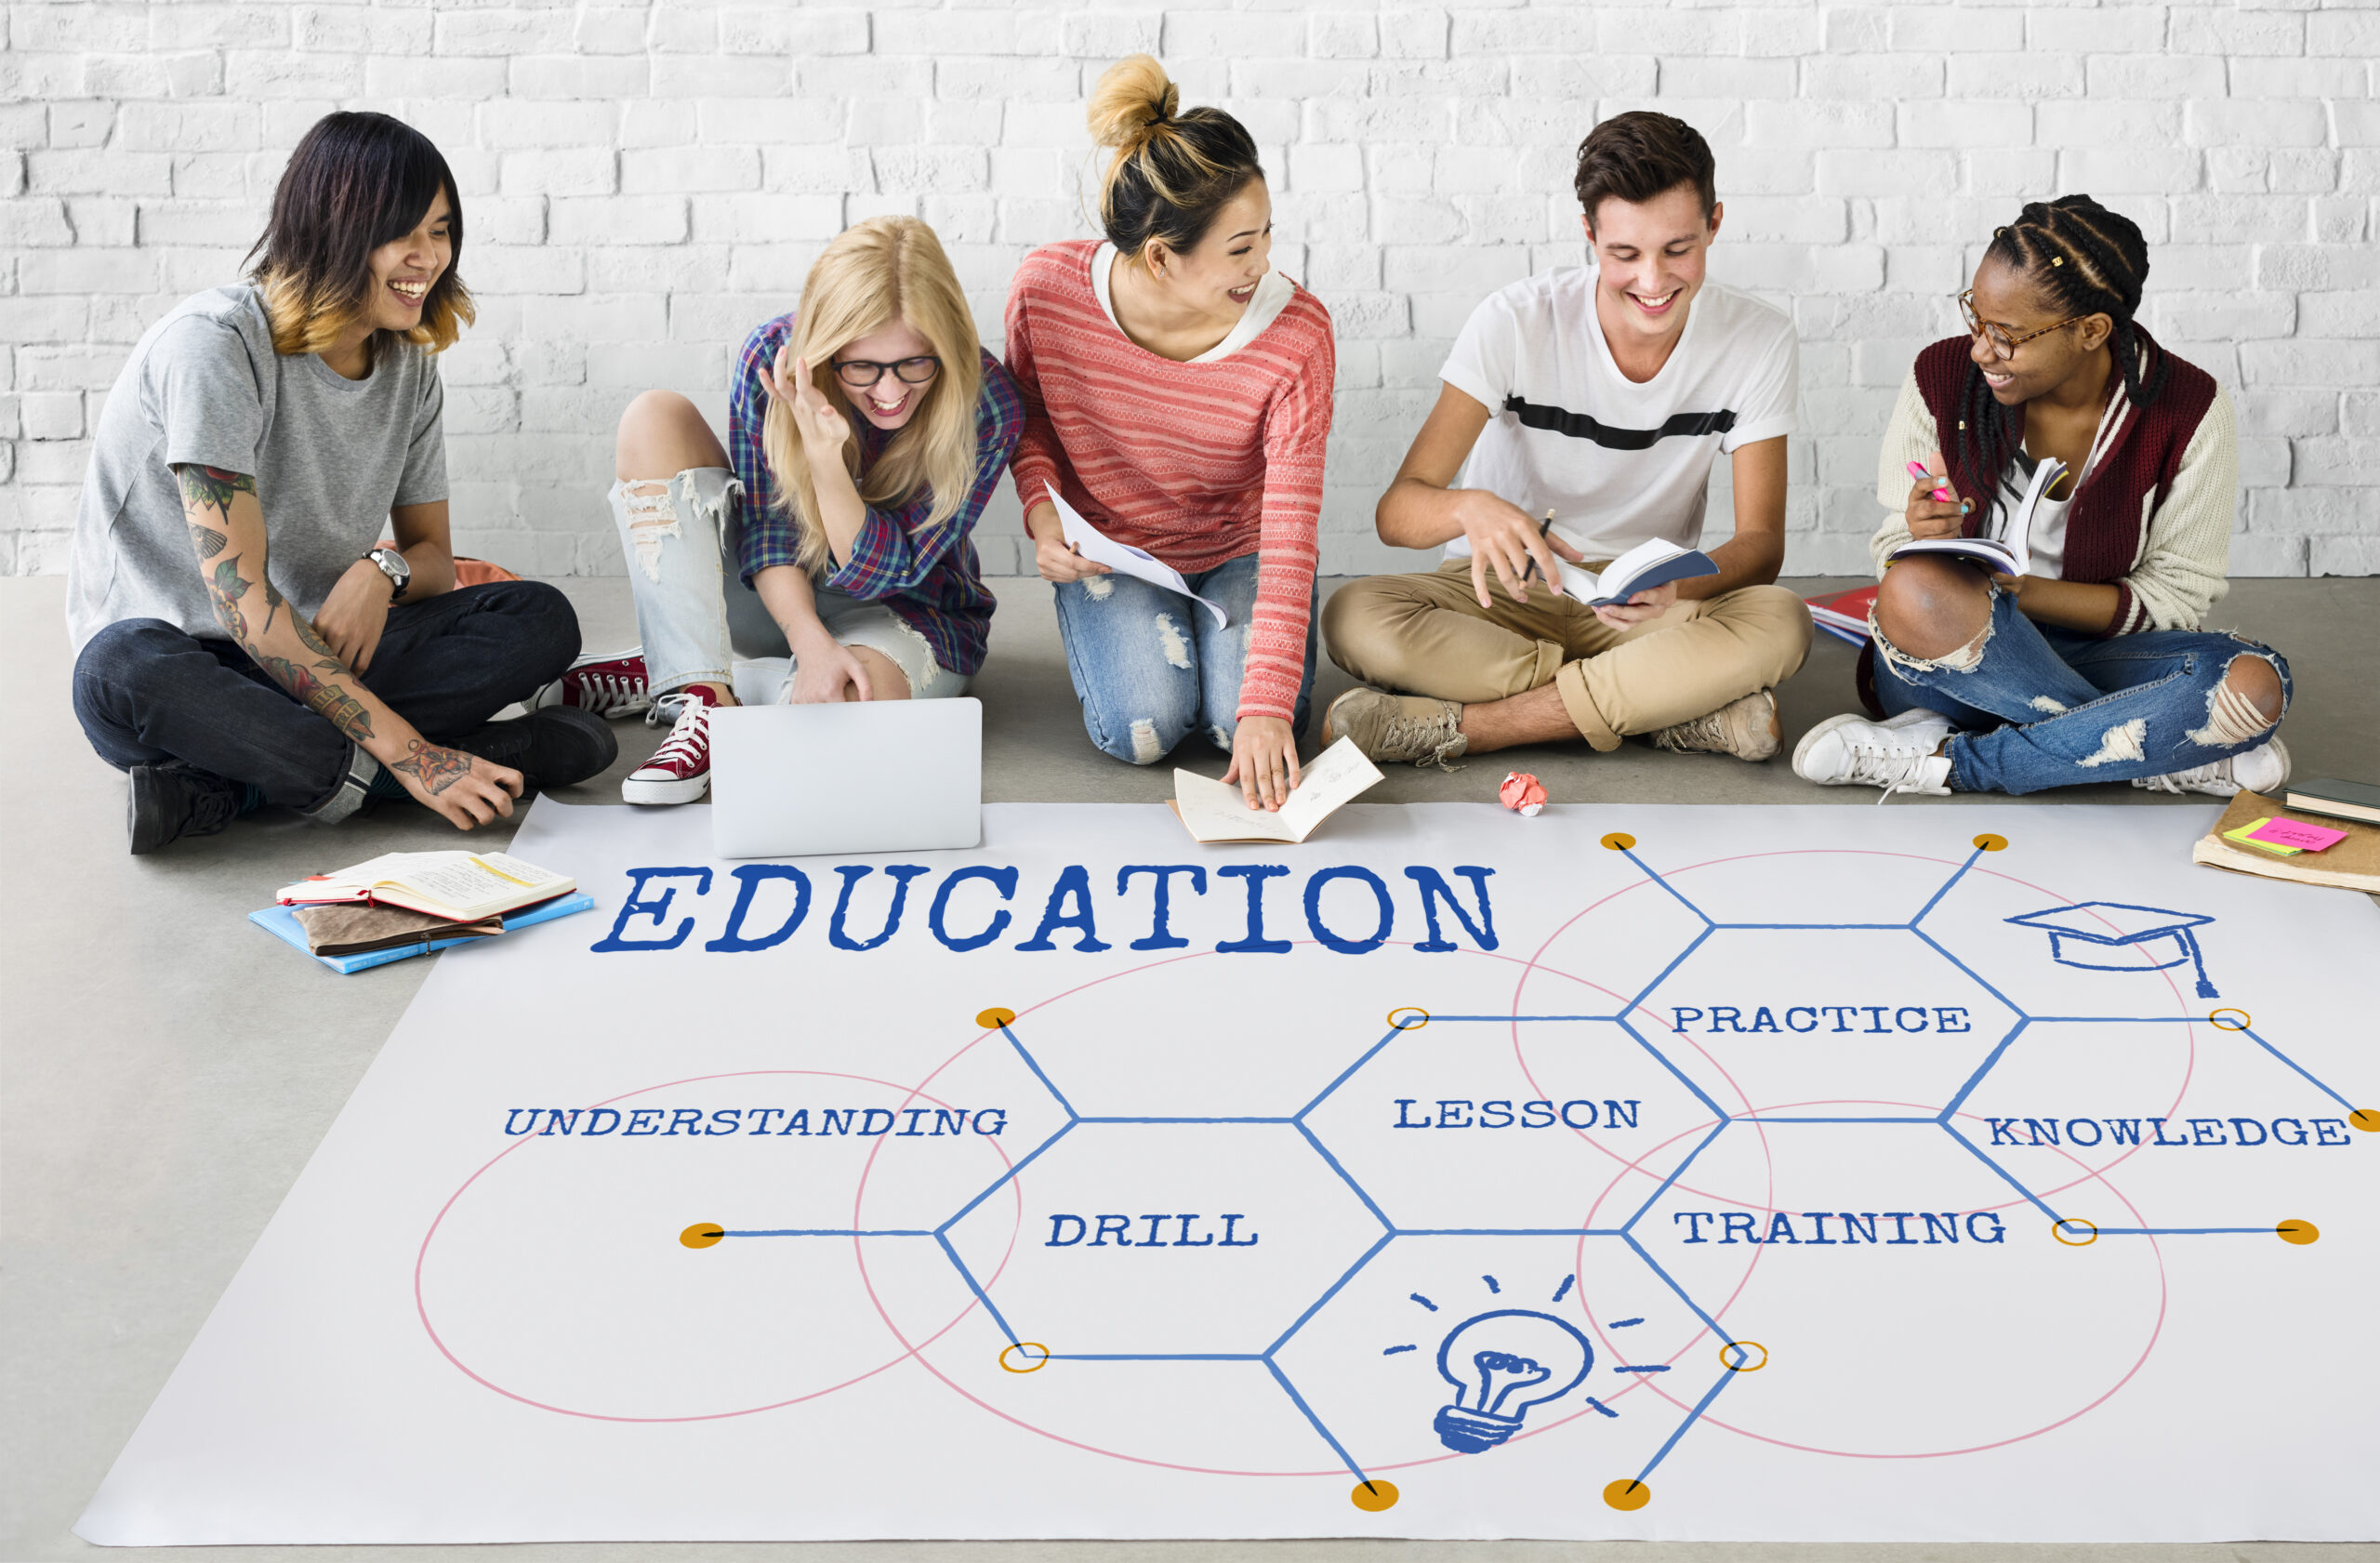 What Are the Most Popular Trends in Education